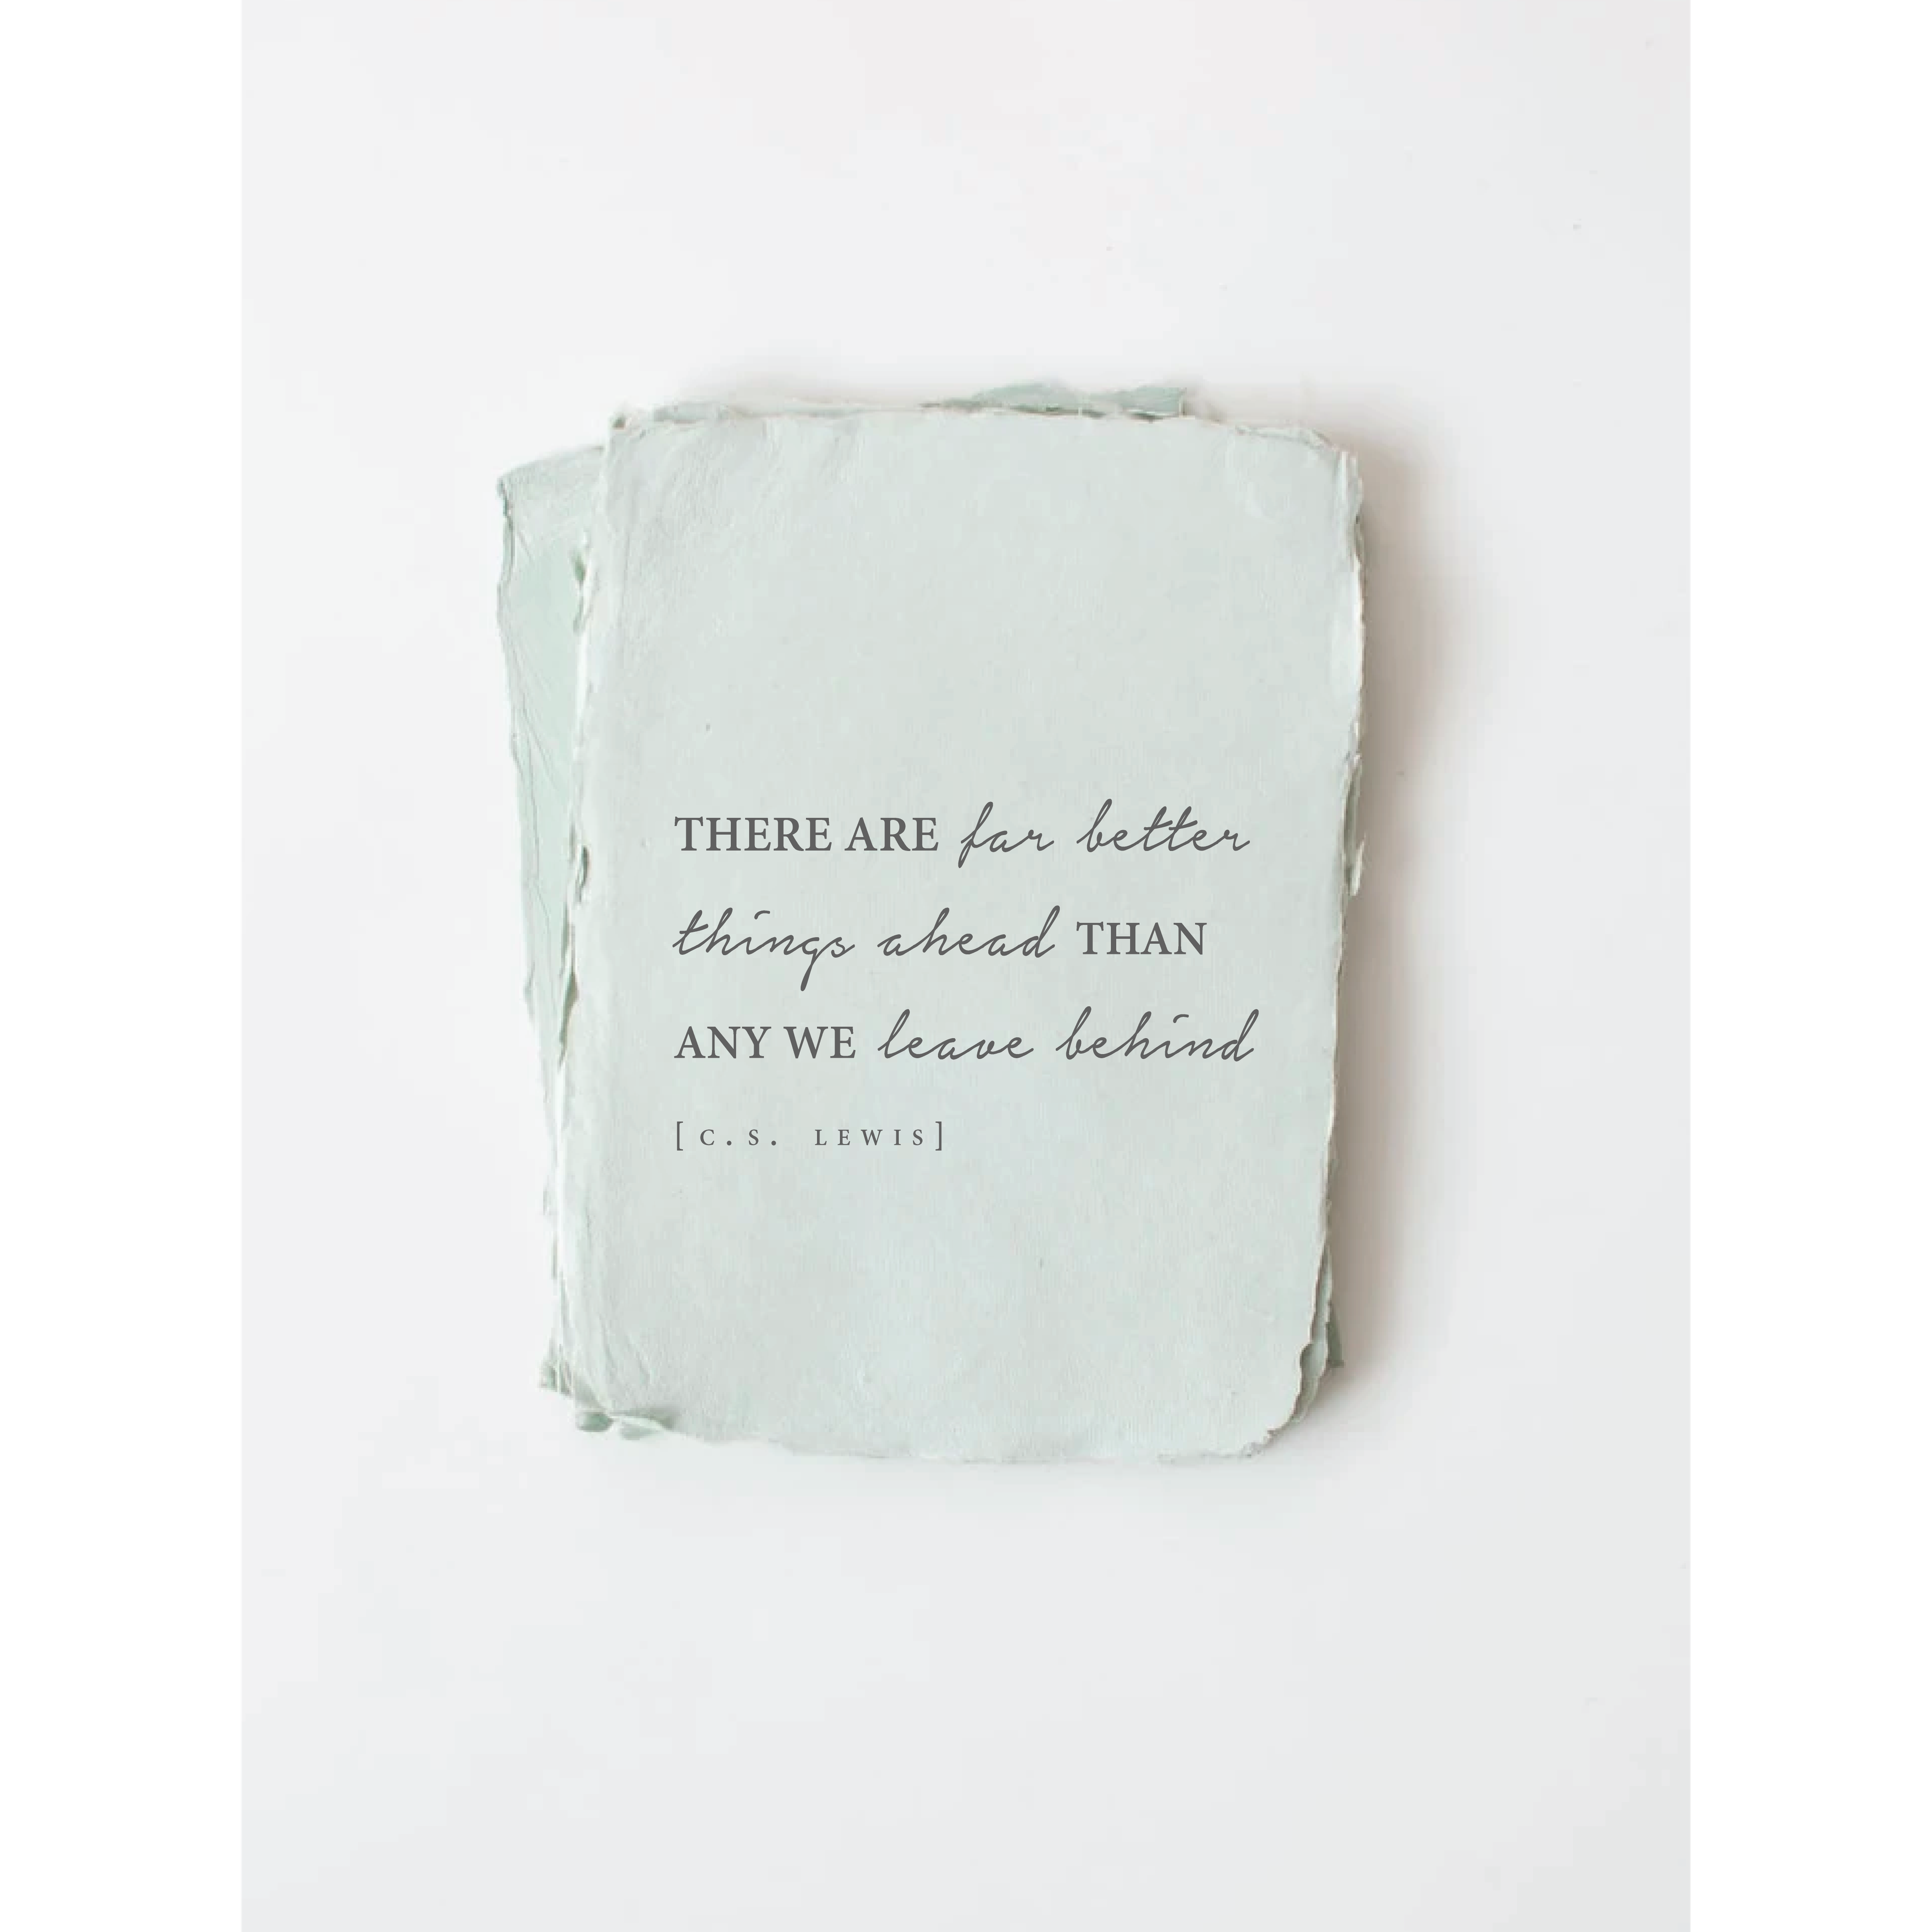 "There are far better things ahead" [C.S. Lewis] Card